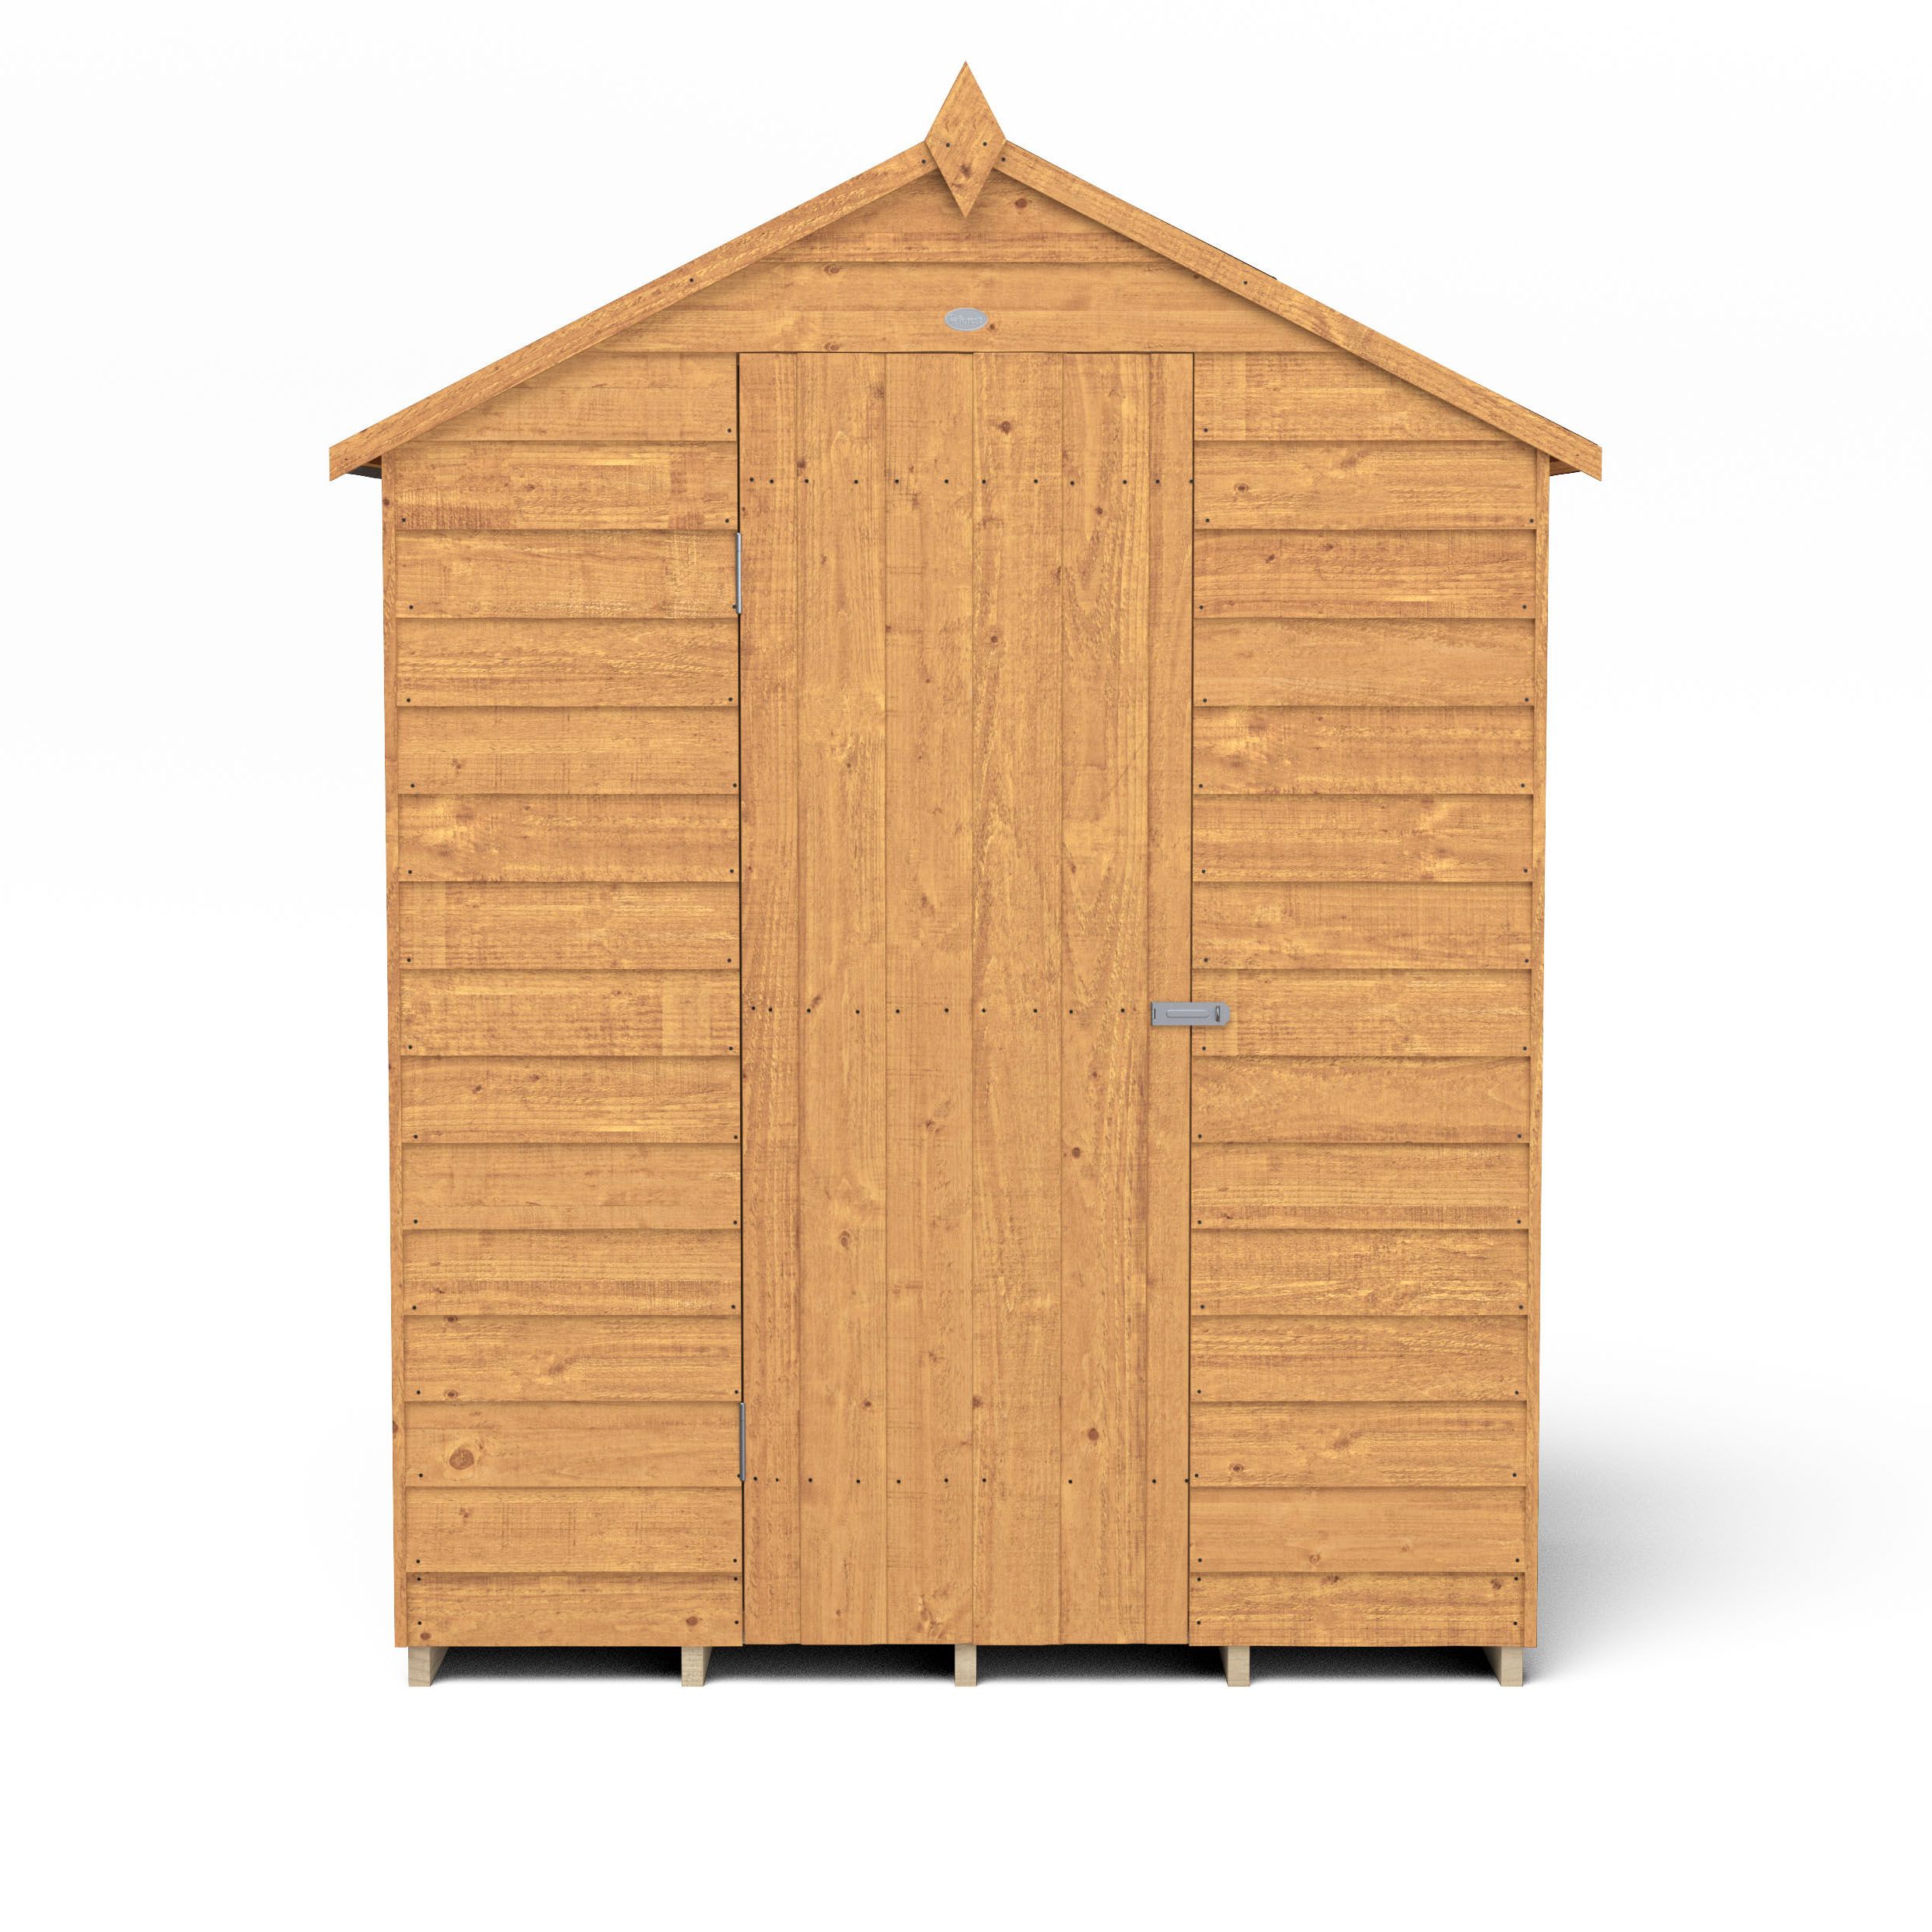 Forest Garden Overlap 5x3 ft Apex Wooden Shed with floor (Base included) - Assembly service included